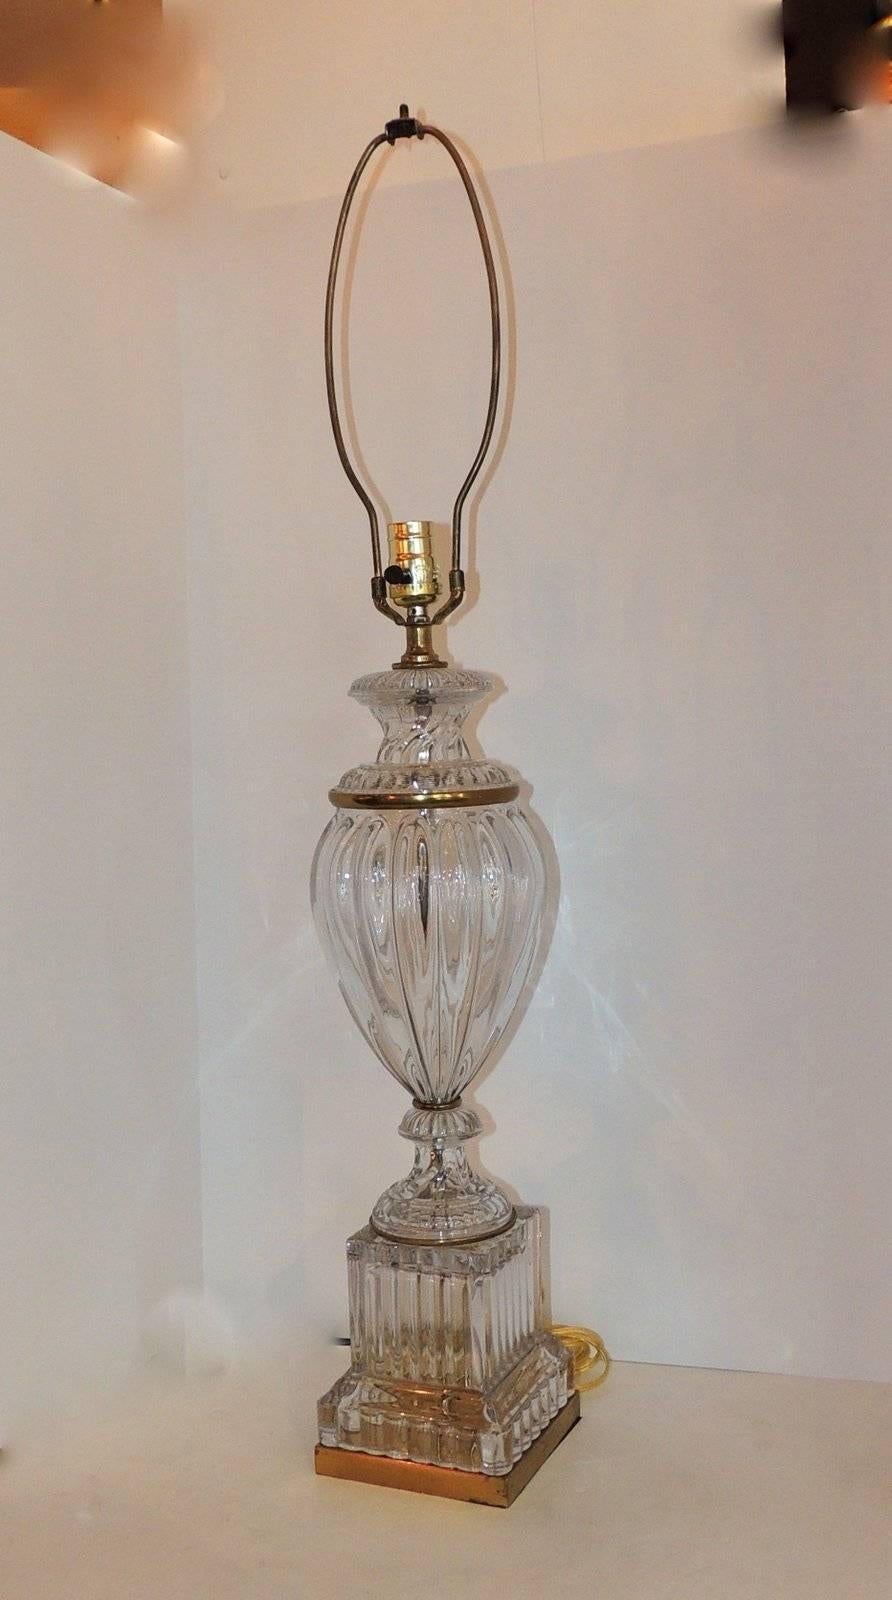 Beautiful fluted and cut crystal glass highlights this large pair of lamps with Ormolu details and pedestal.

Measures: 34" H x 5.5" base

Crystal center urn is 20"